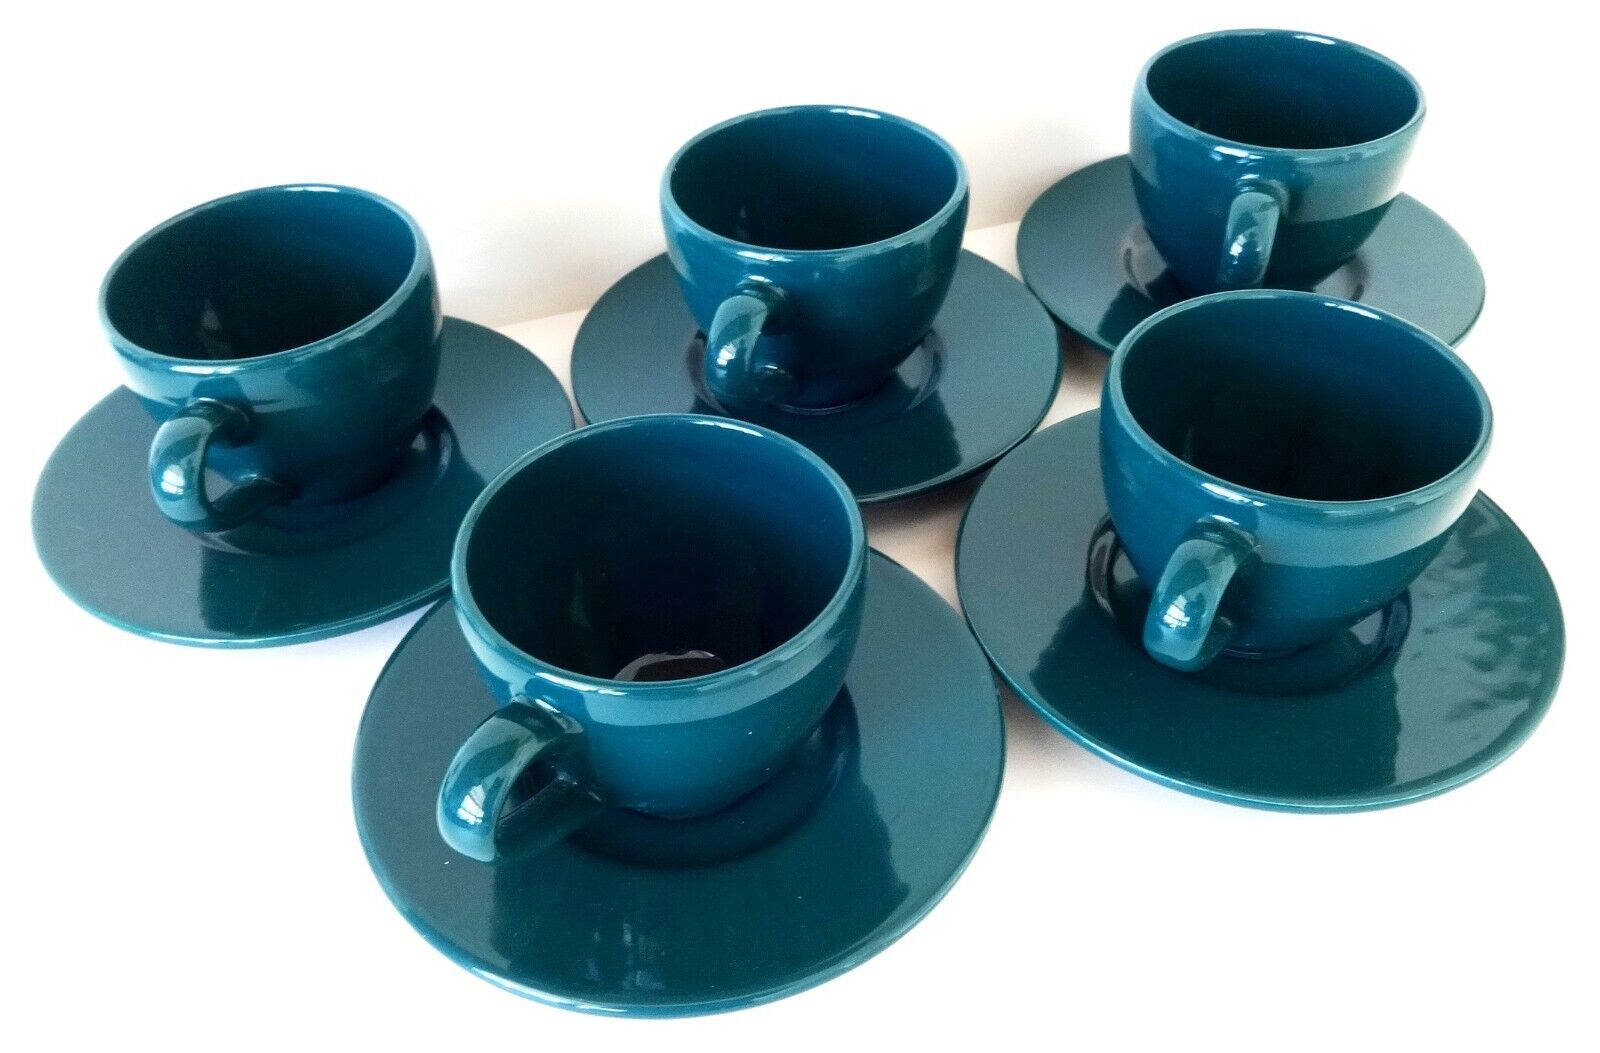 Vintage Pagnossin Italy Set of 5 Dark Green Expresso Cups & Saucers Retro 1980s 